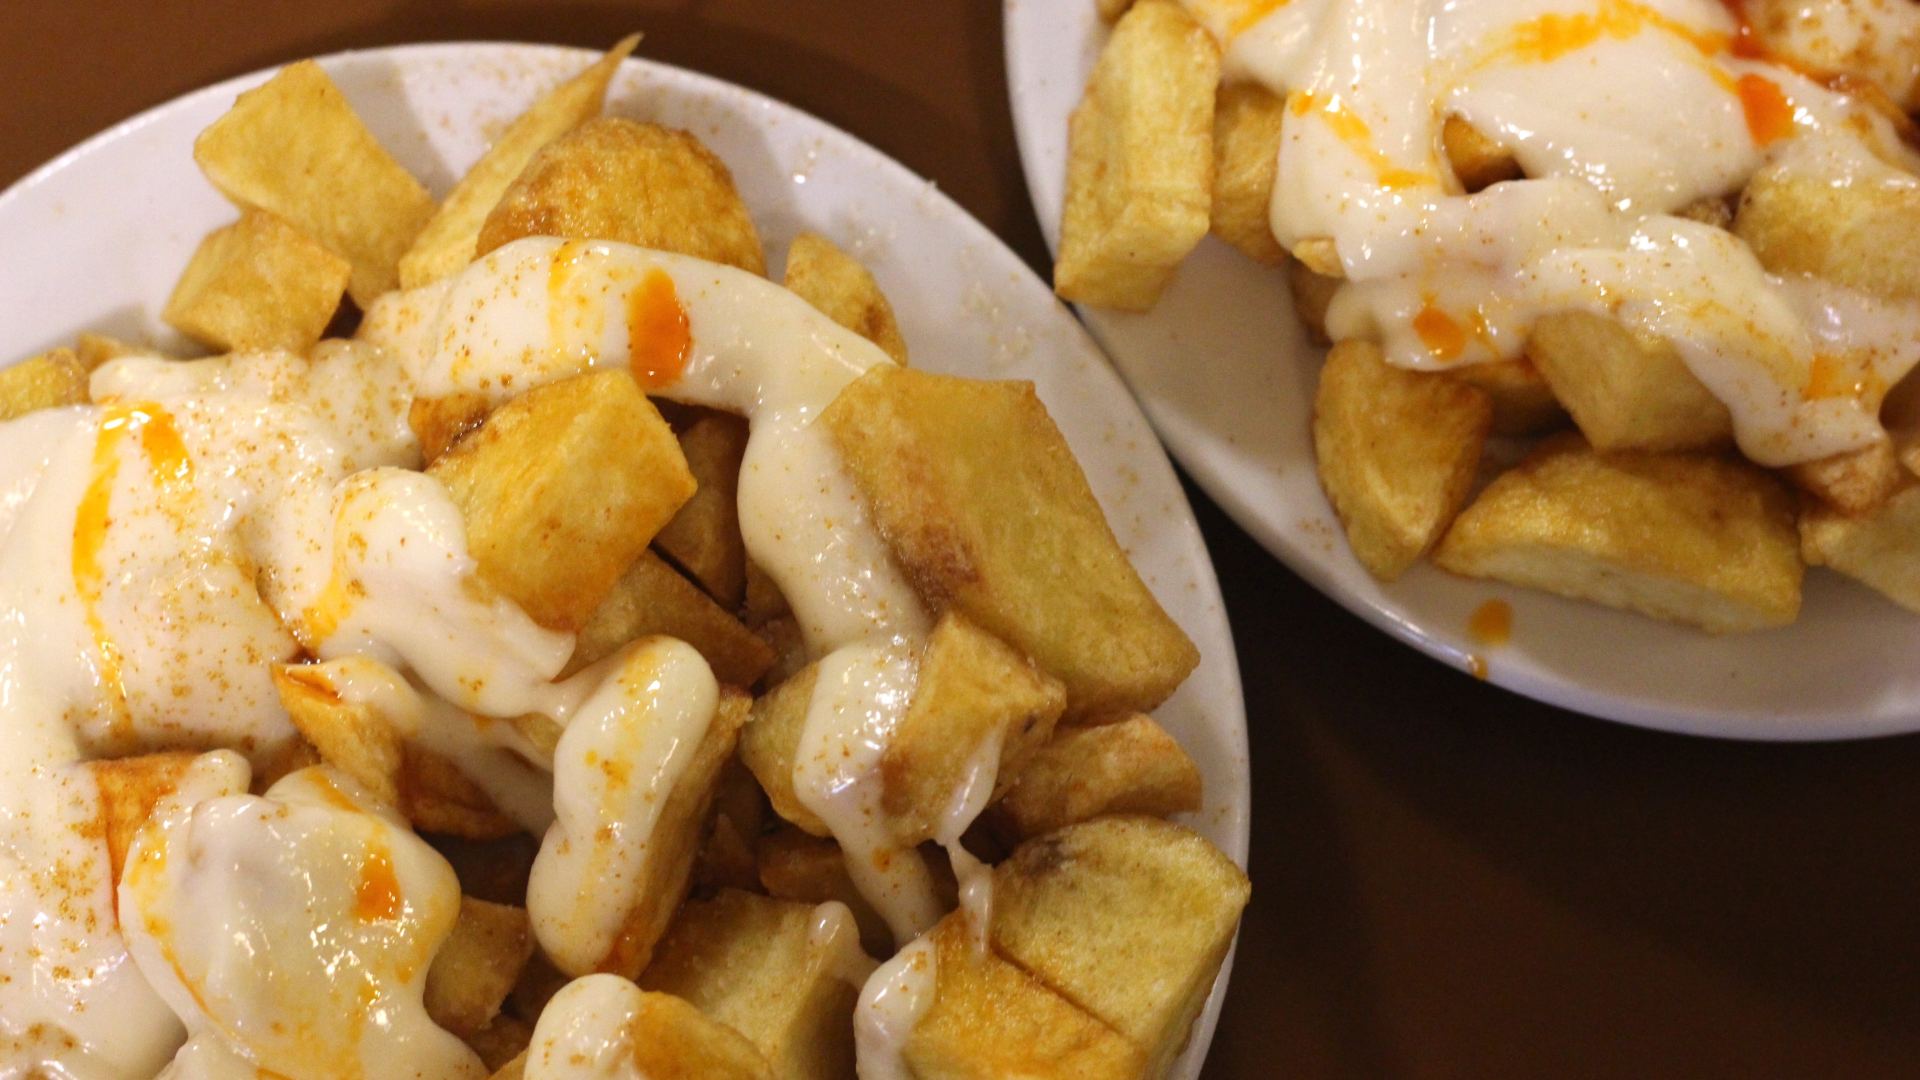 5 places to try the best 'patates braves' in Barcelona, one of the most famous tapa dishes